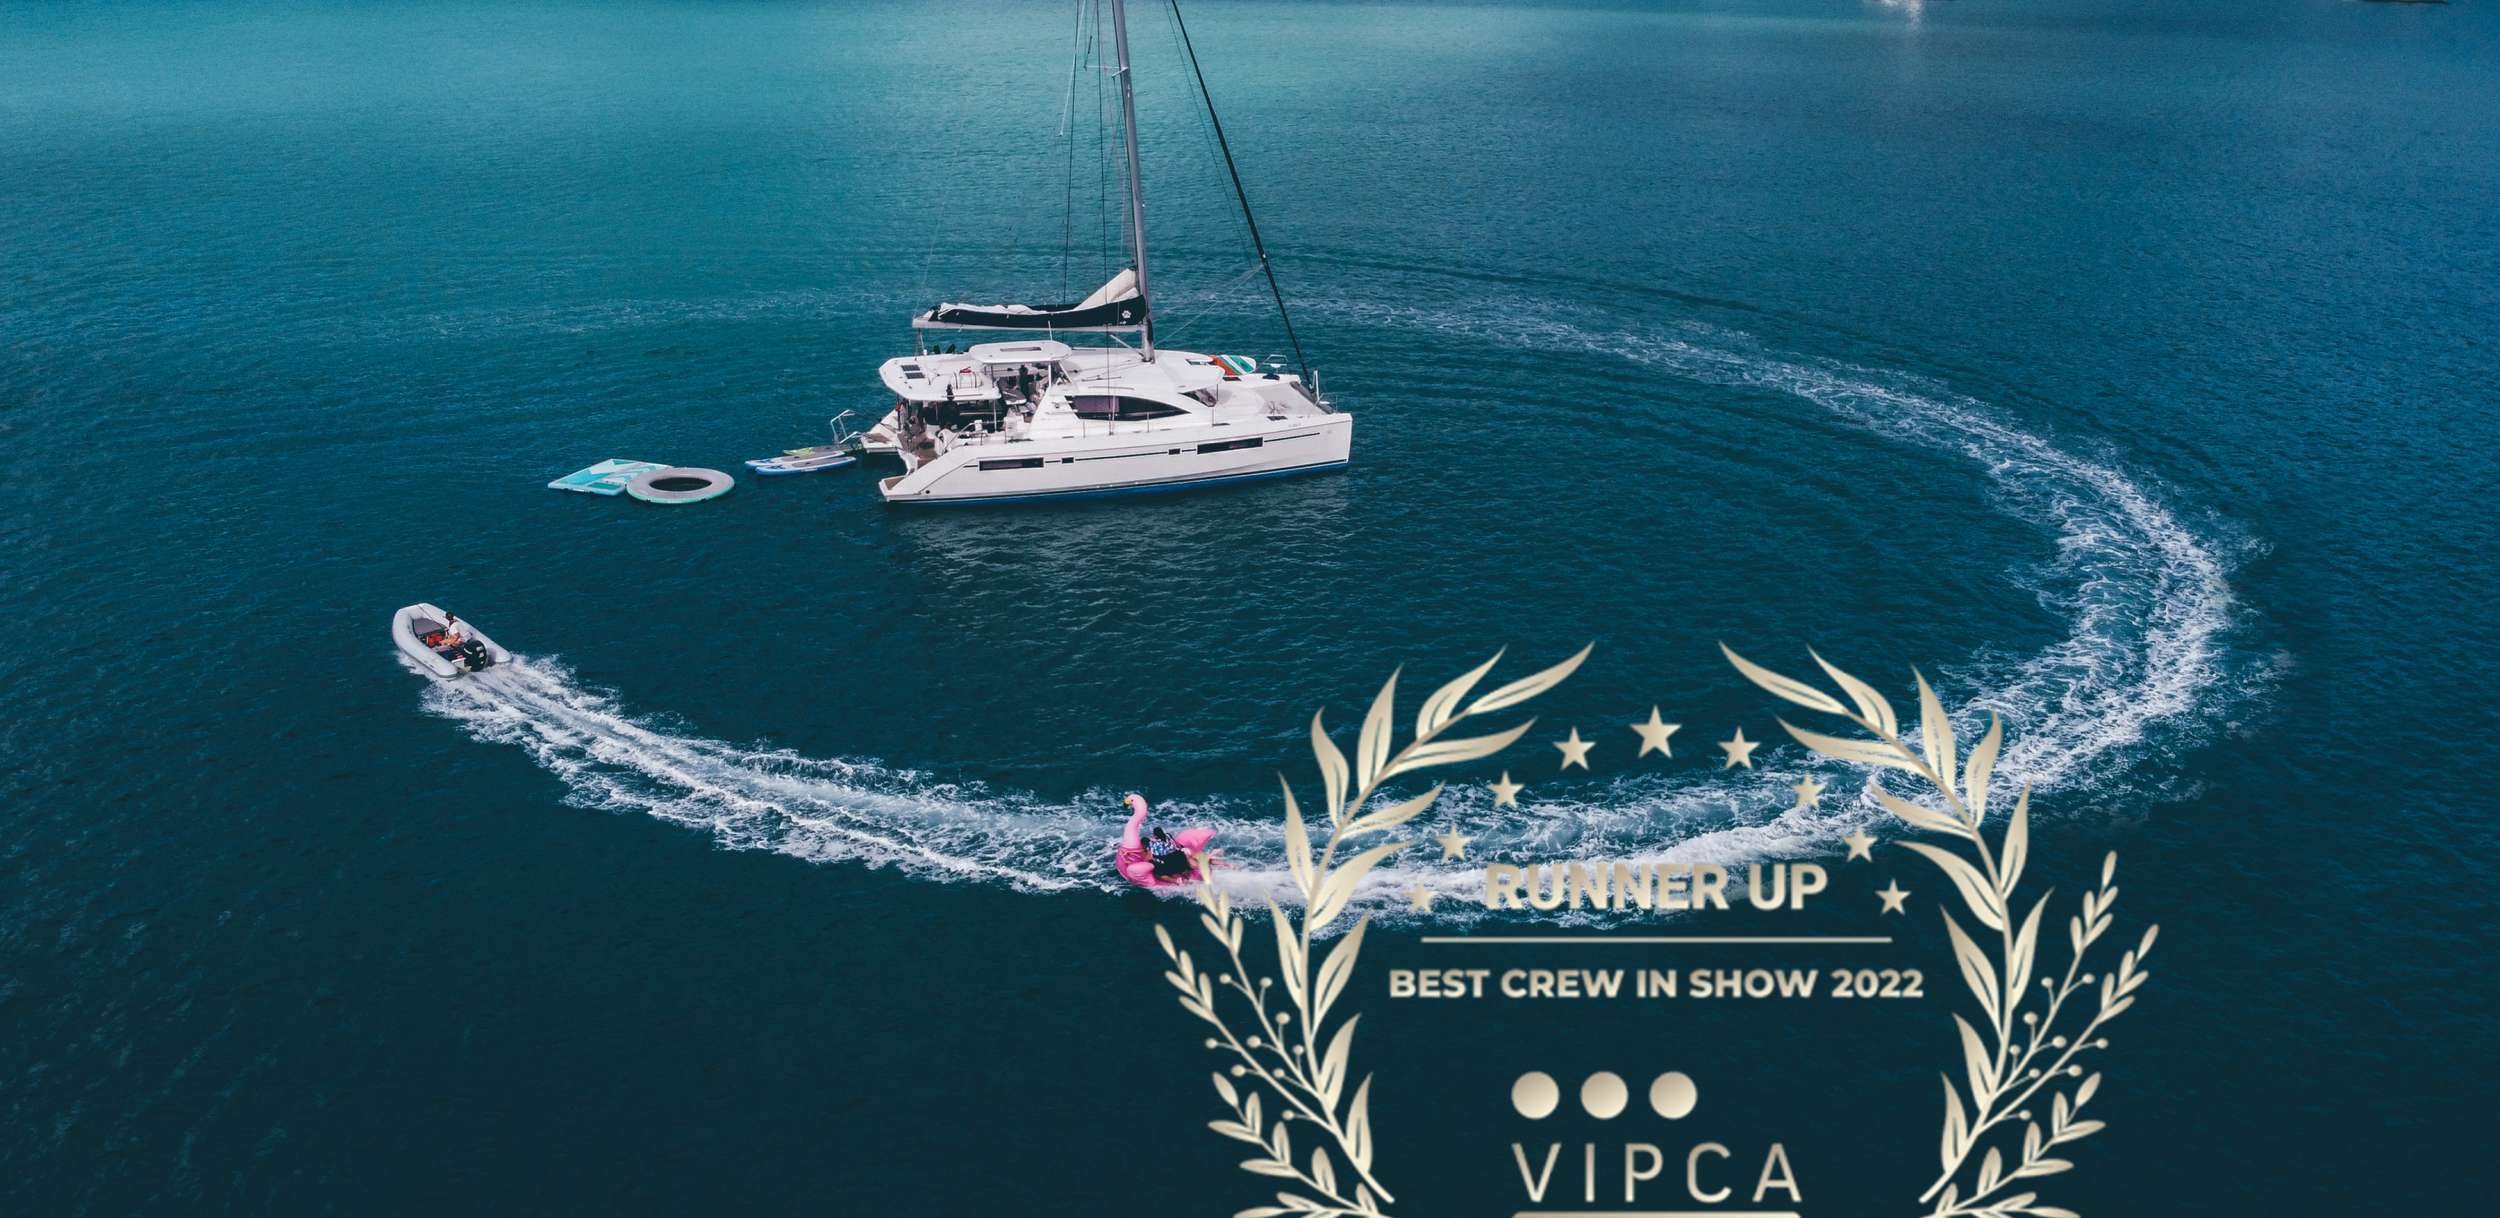 2022 RUNNER UP BEST CREW IN SHOW USVI

Vicarious- adj: experienced or realized through imaginative or sympathetic participation in the experience of another.

We believe that aside from water, food, shelter, exercise, and nature the most important necessity in human existence is connection. On our boat we strive to not only provide the best water, food, and shelter but most importantly we love to build community and opportunities for you to connect with your loved ones and friends. When you join us on an adventure through the Caribbean you will experience storytelling between the crew, your guests, eat local food, and an eco-friendly off grid living experience. All of which is designed to bring you Vicariously closer to nature, yourself, and most importantly your loved ones.